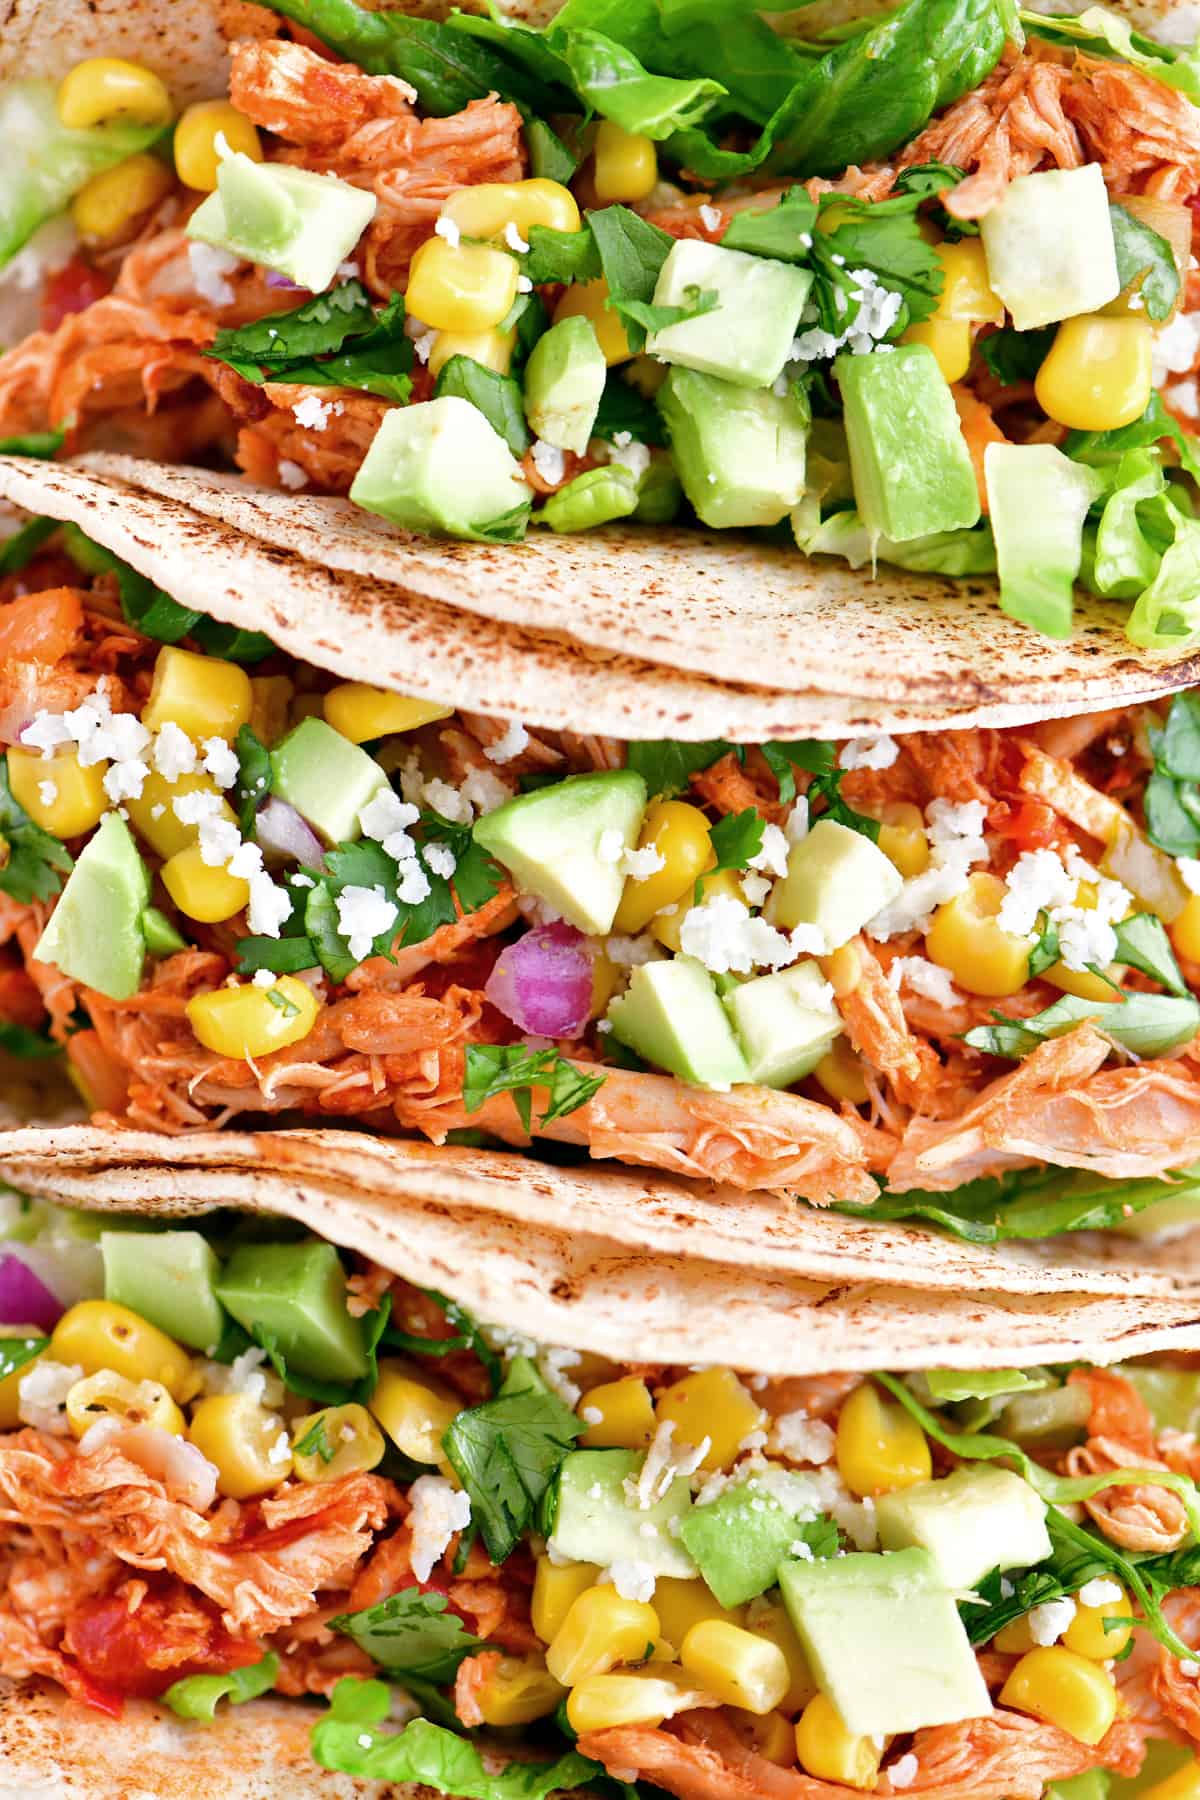 Tinga chicken and vegetables in corn tortillas.